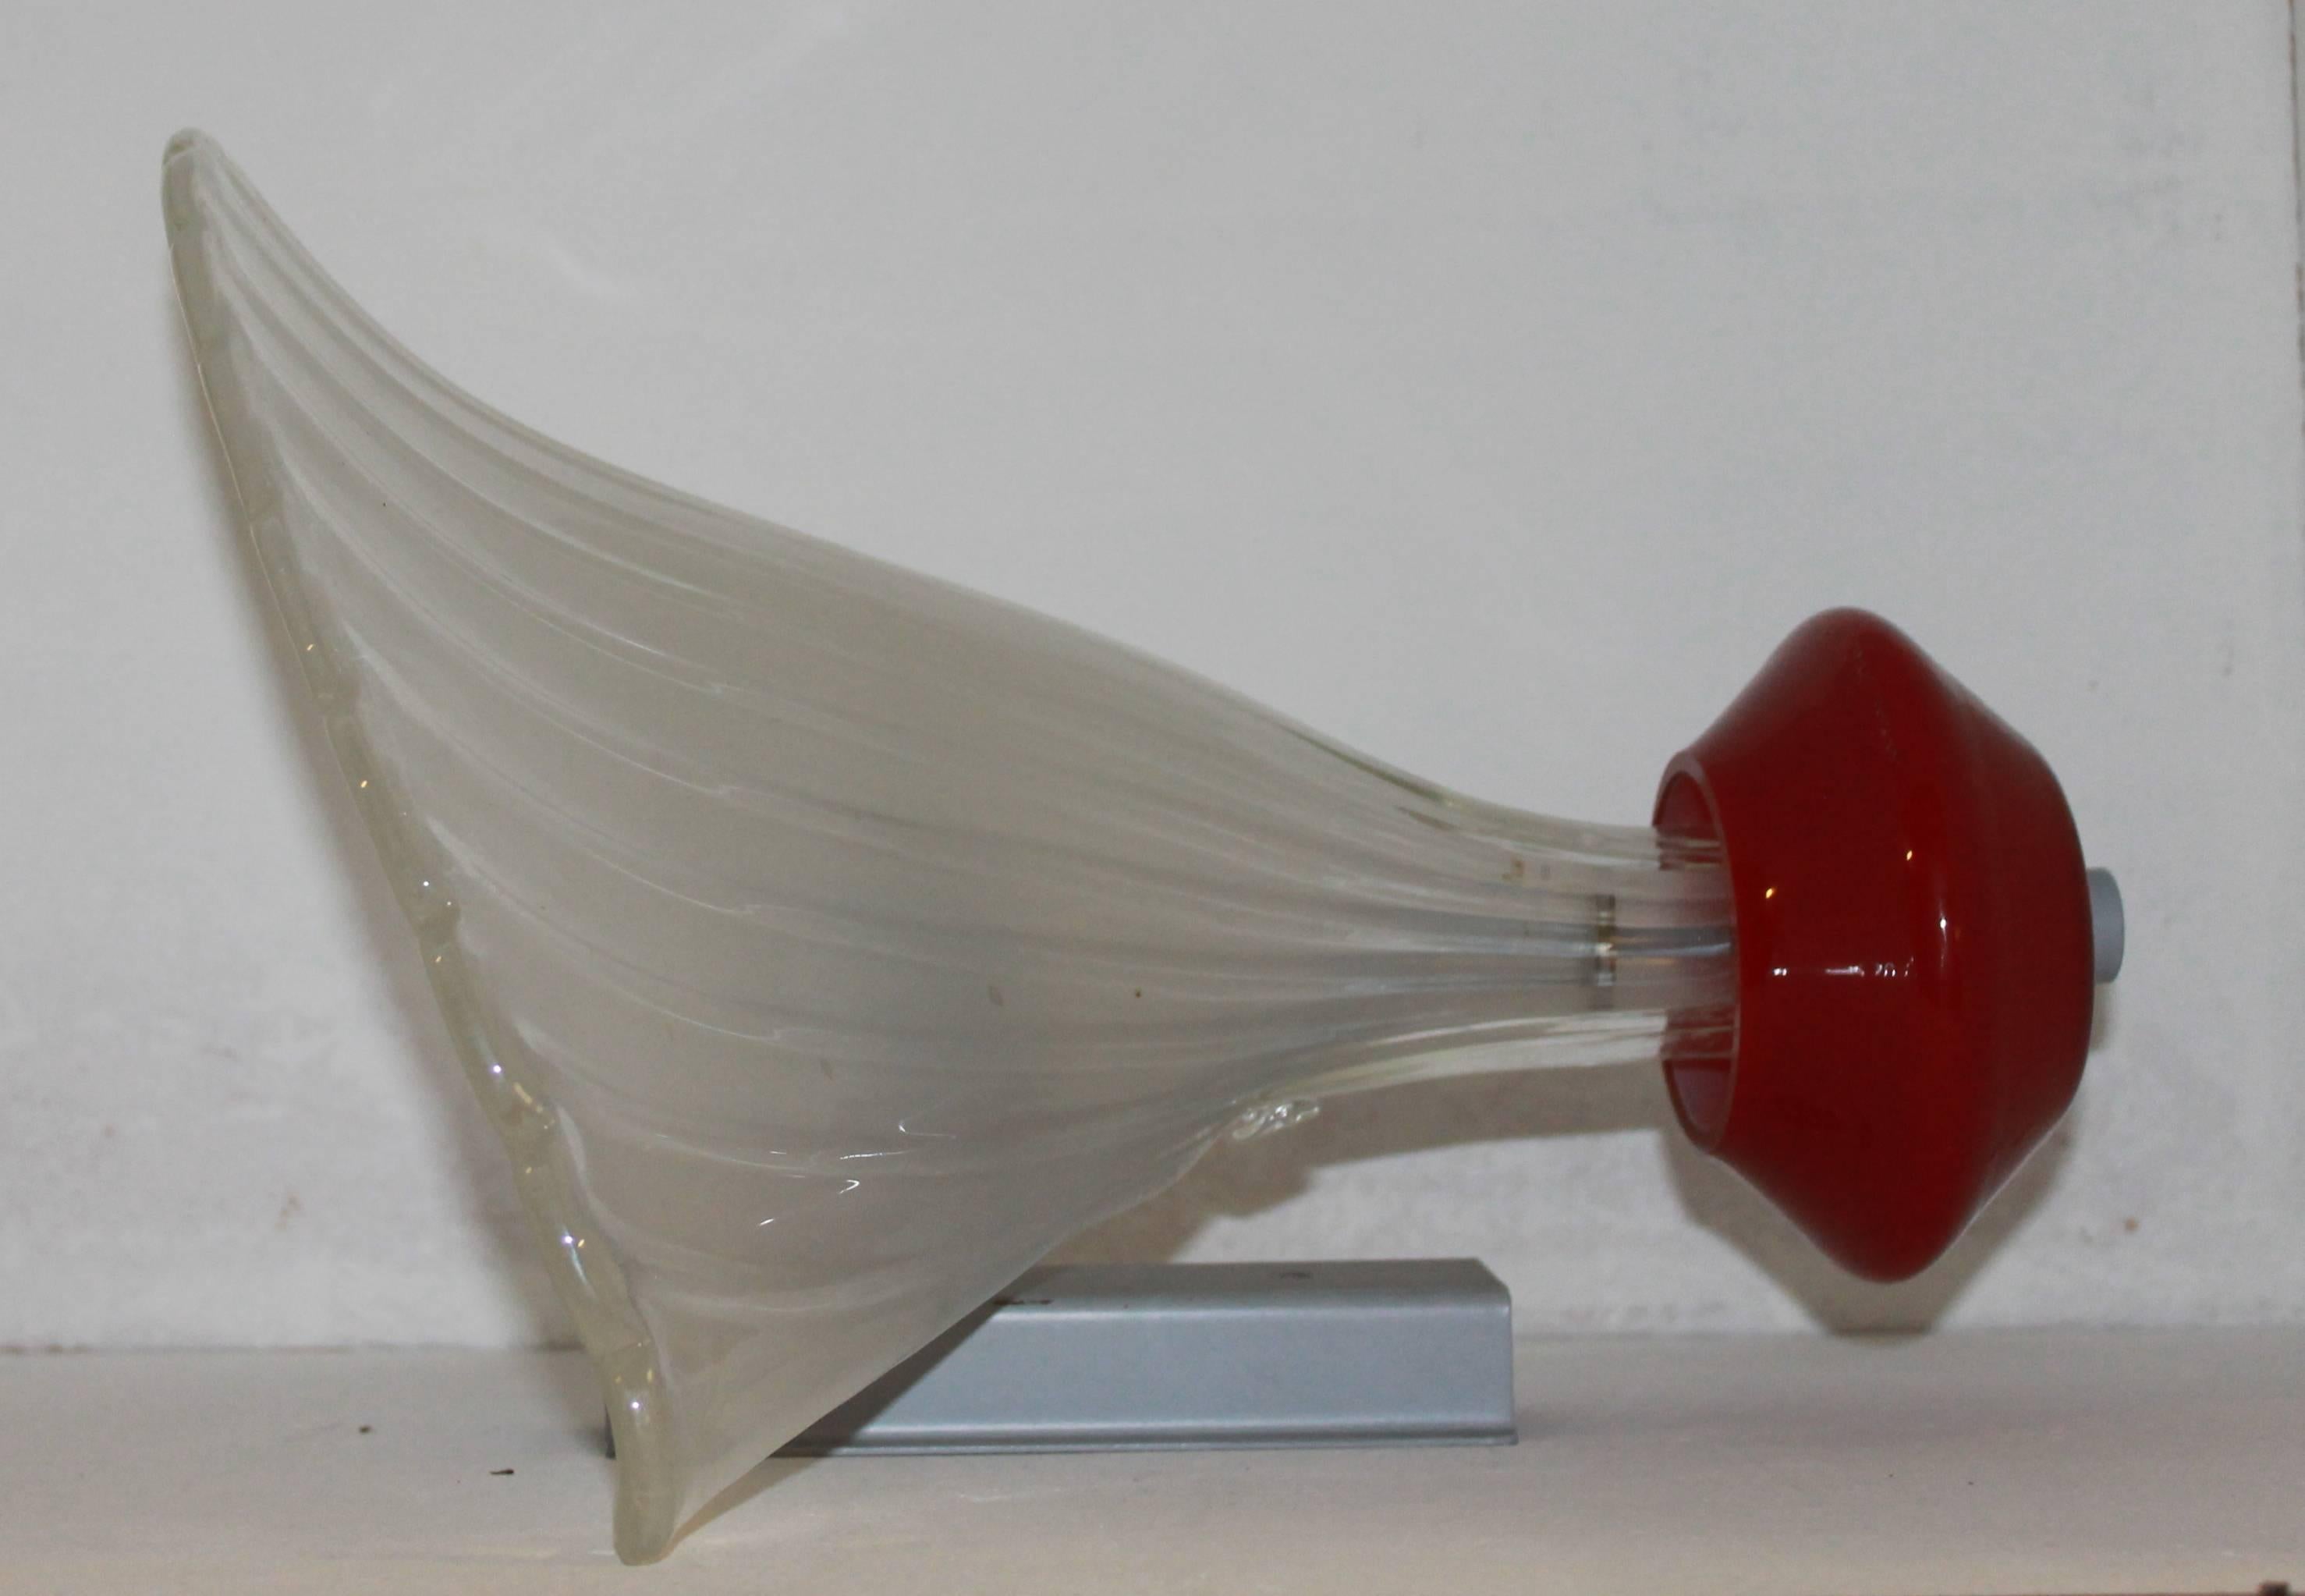 Bubble Glass by Paolo Venini, dated 1920 circa.

The sconce has glazed clear white ubble glass and a red glass base. The support is in nickeled metal.